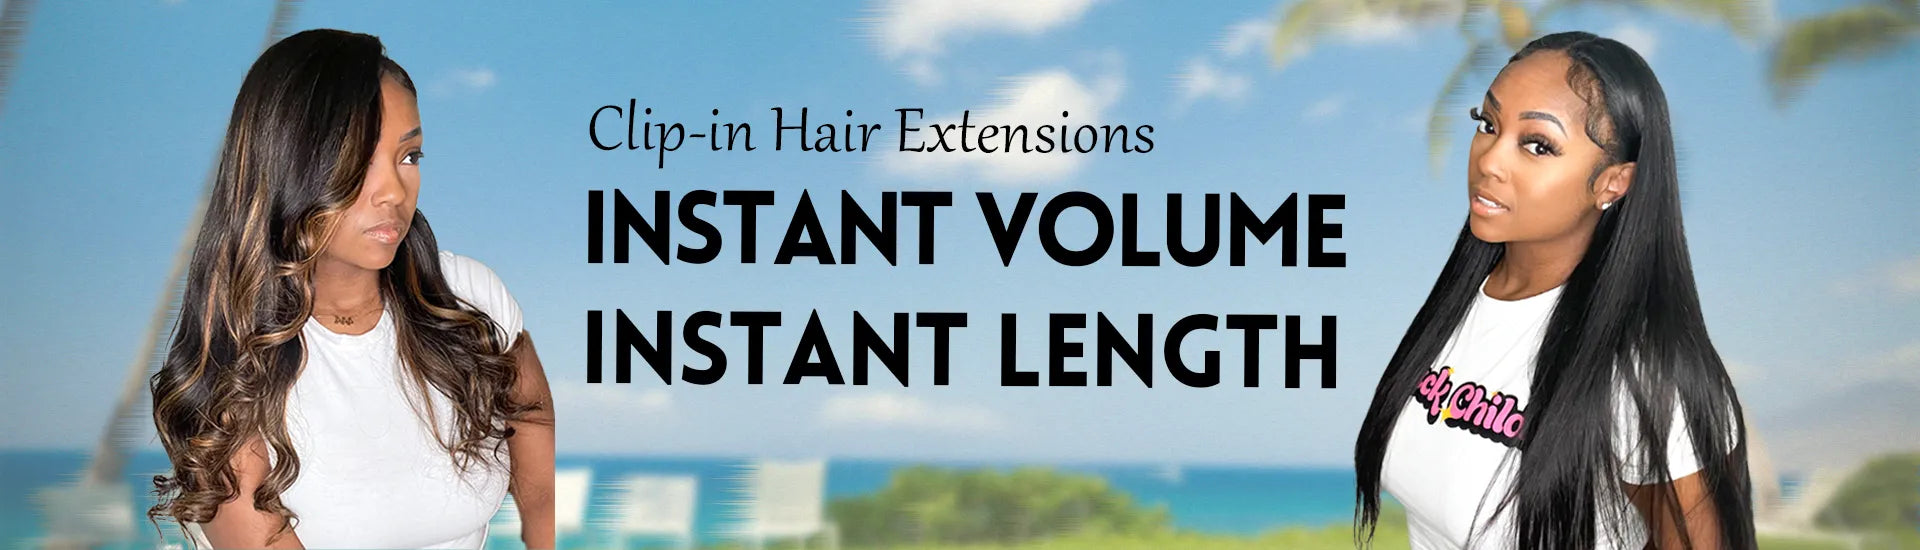 Clip-in Hair Extensions for Instant Volume & Length